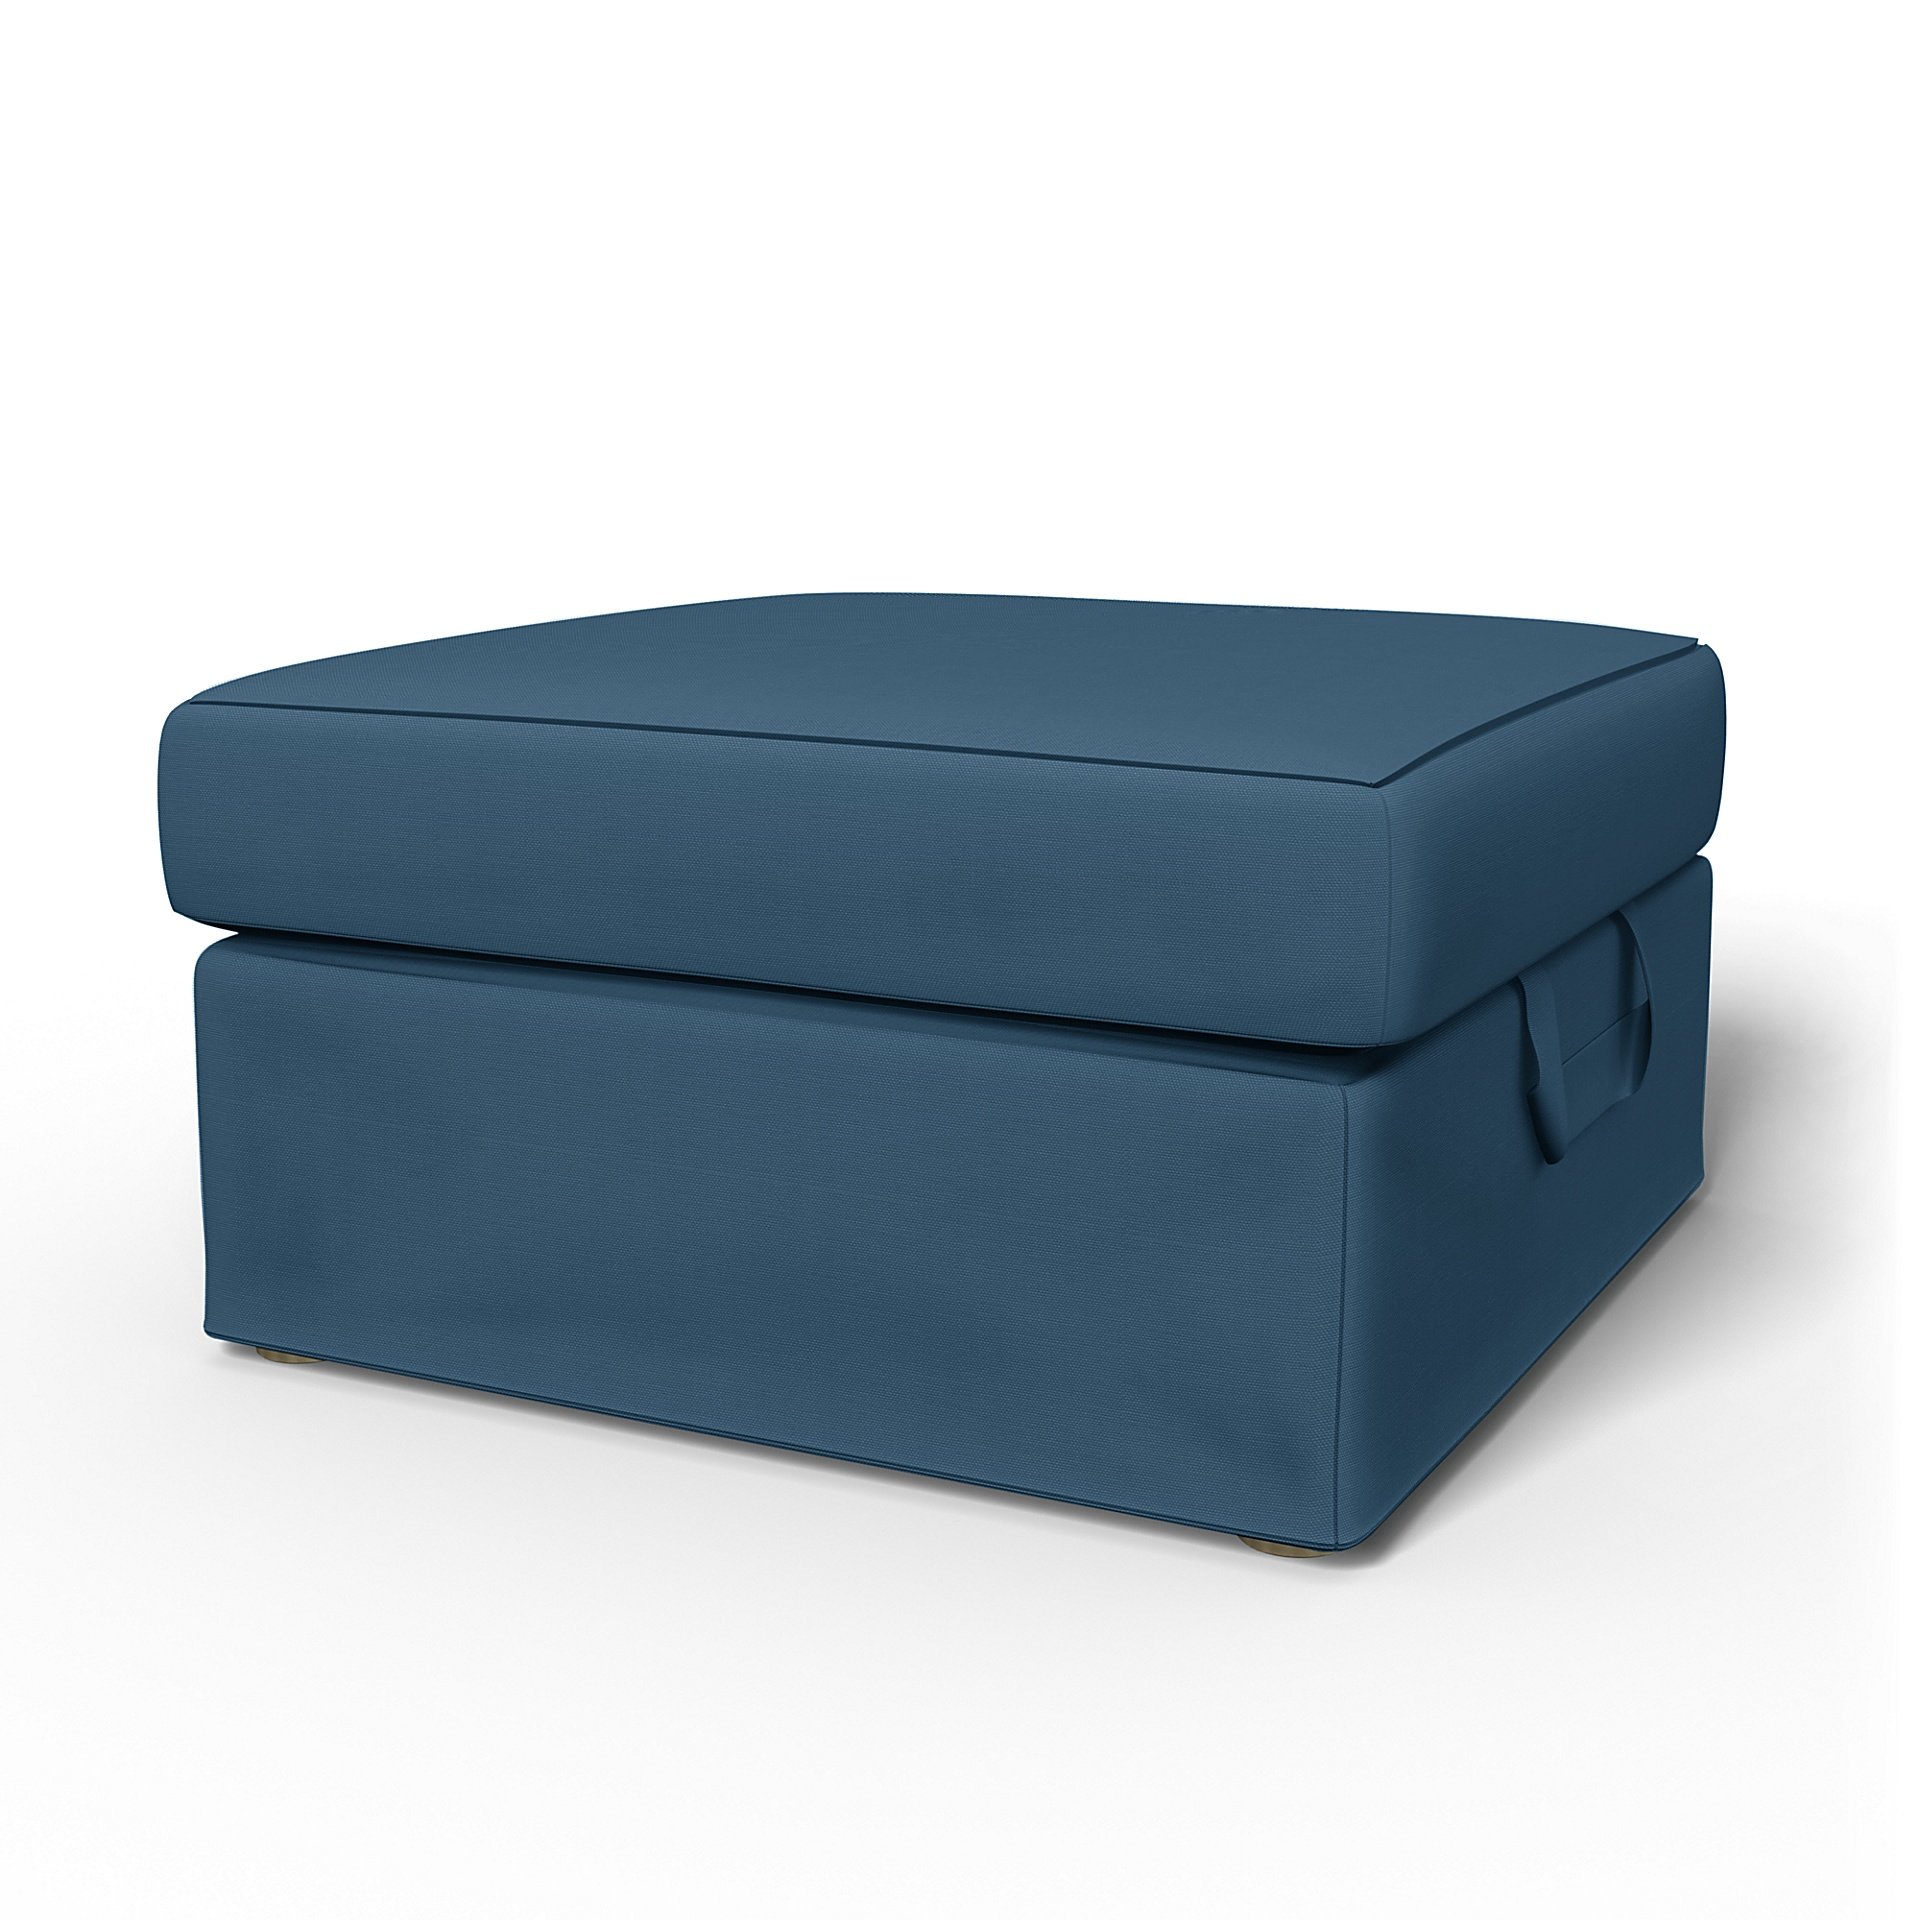 IKEA - Tomelilla Foto Footstool Cover, Real Teal, Cotton - Bemz